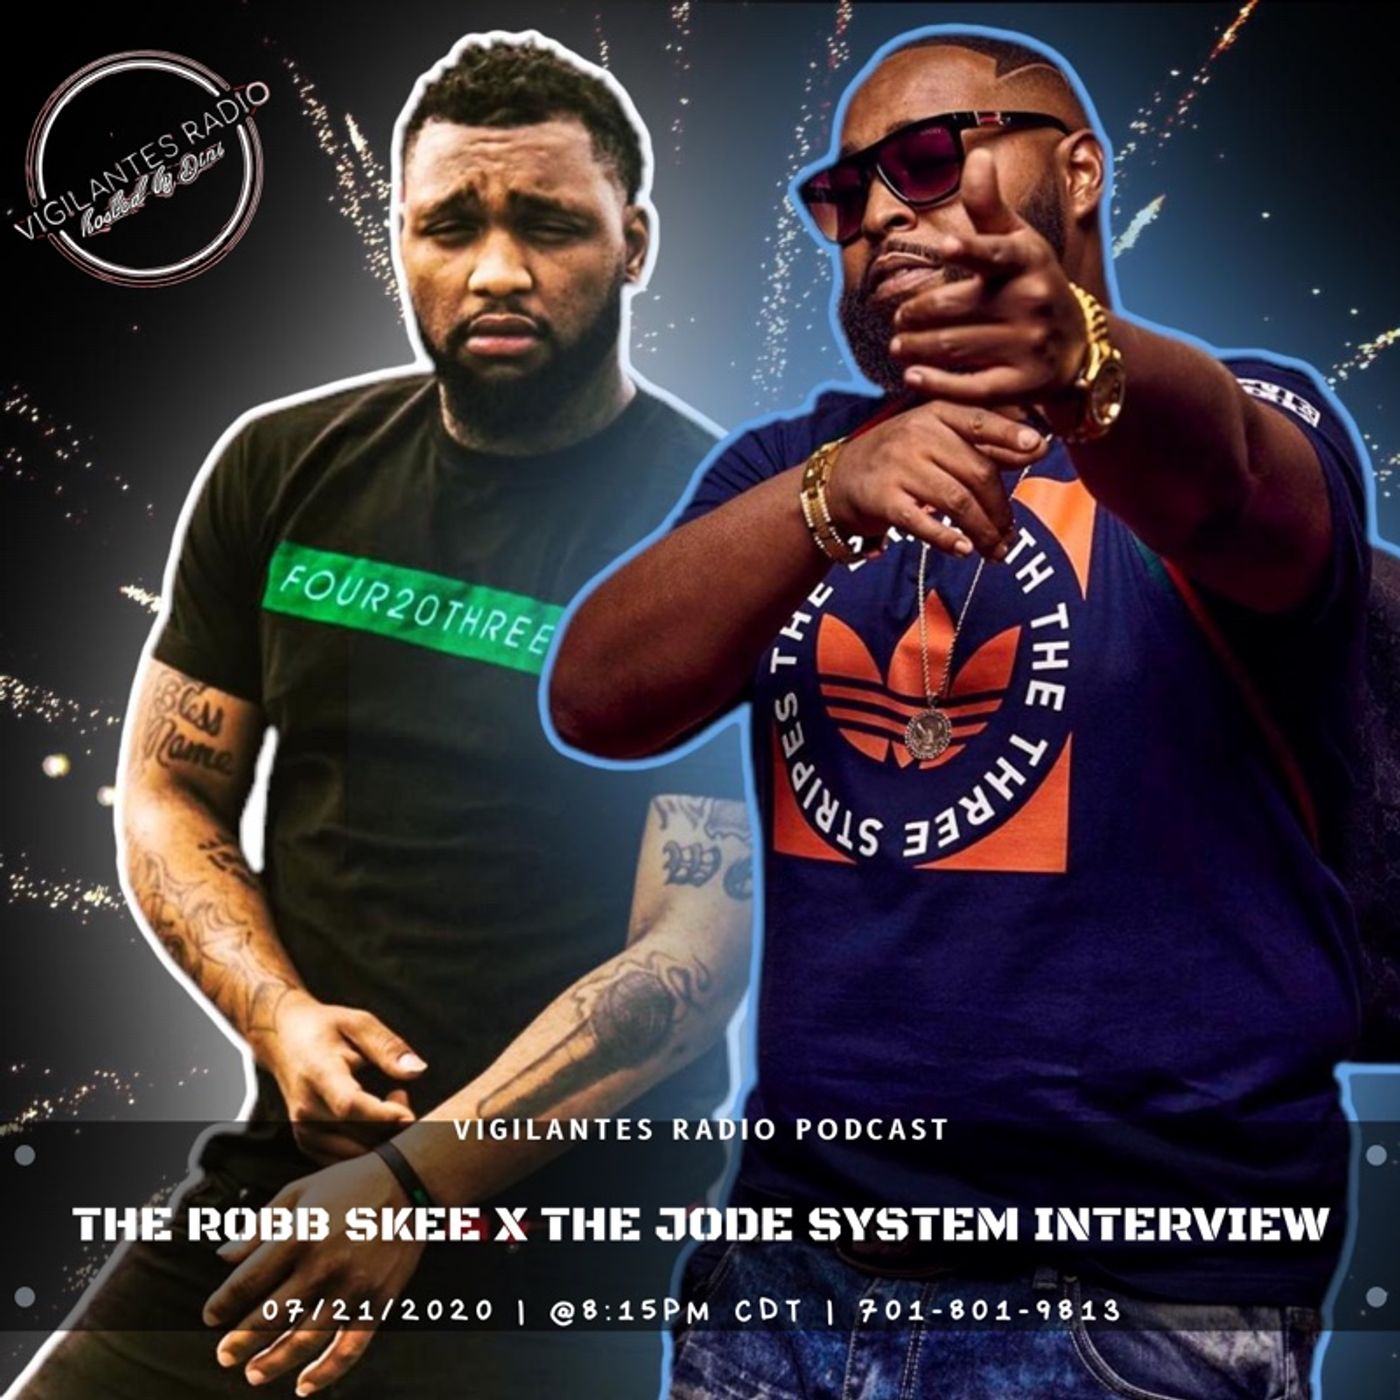 The Robb Skee x The Jode System Interview. Image